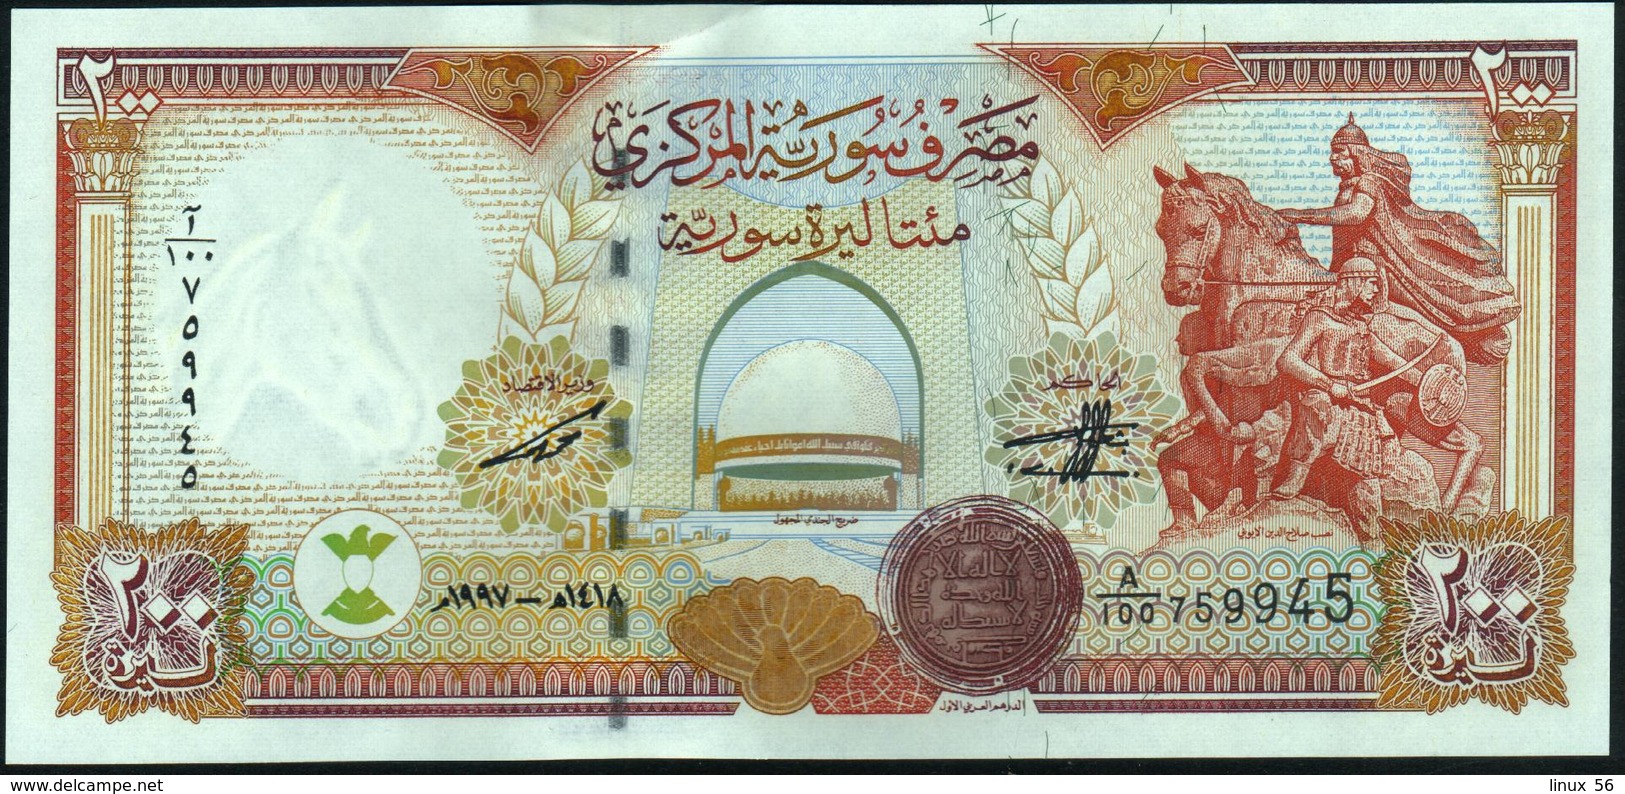 SYRIA - 200 Pounds 1997 UNC P.109 - Syrie